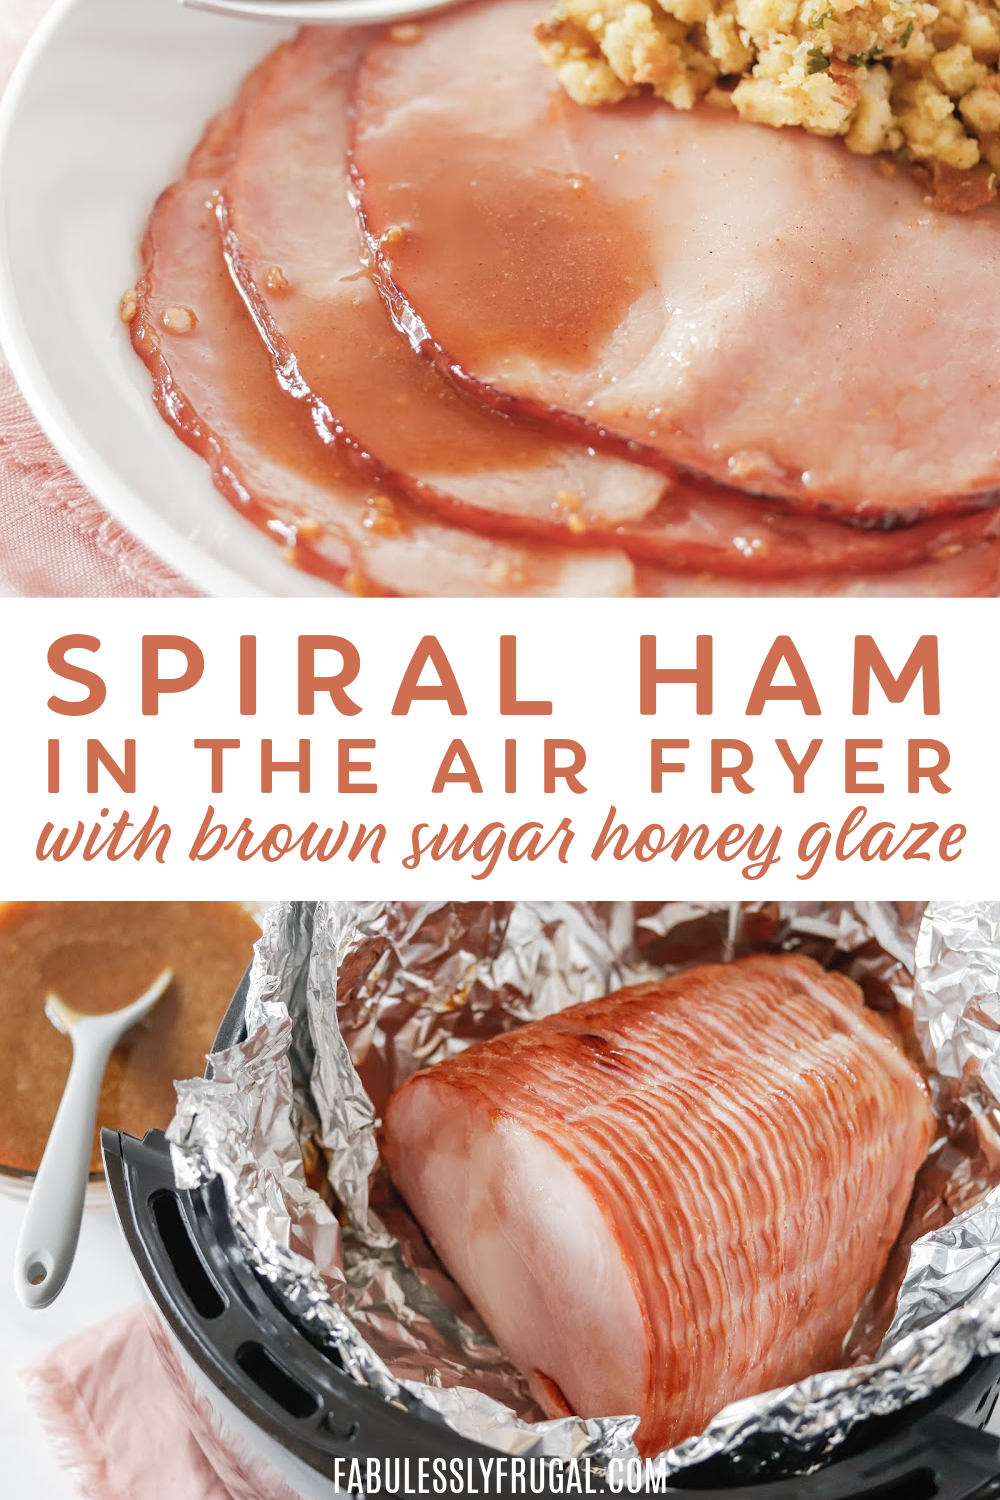 Fall in love with perfect family gathering air fryer meal. Air Fryer spiral ham will be your new go-to family favorite meal.